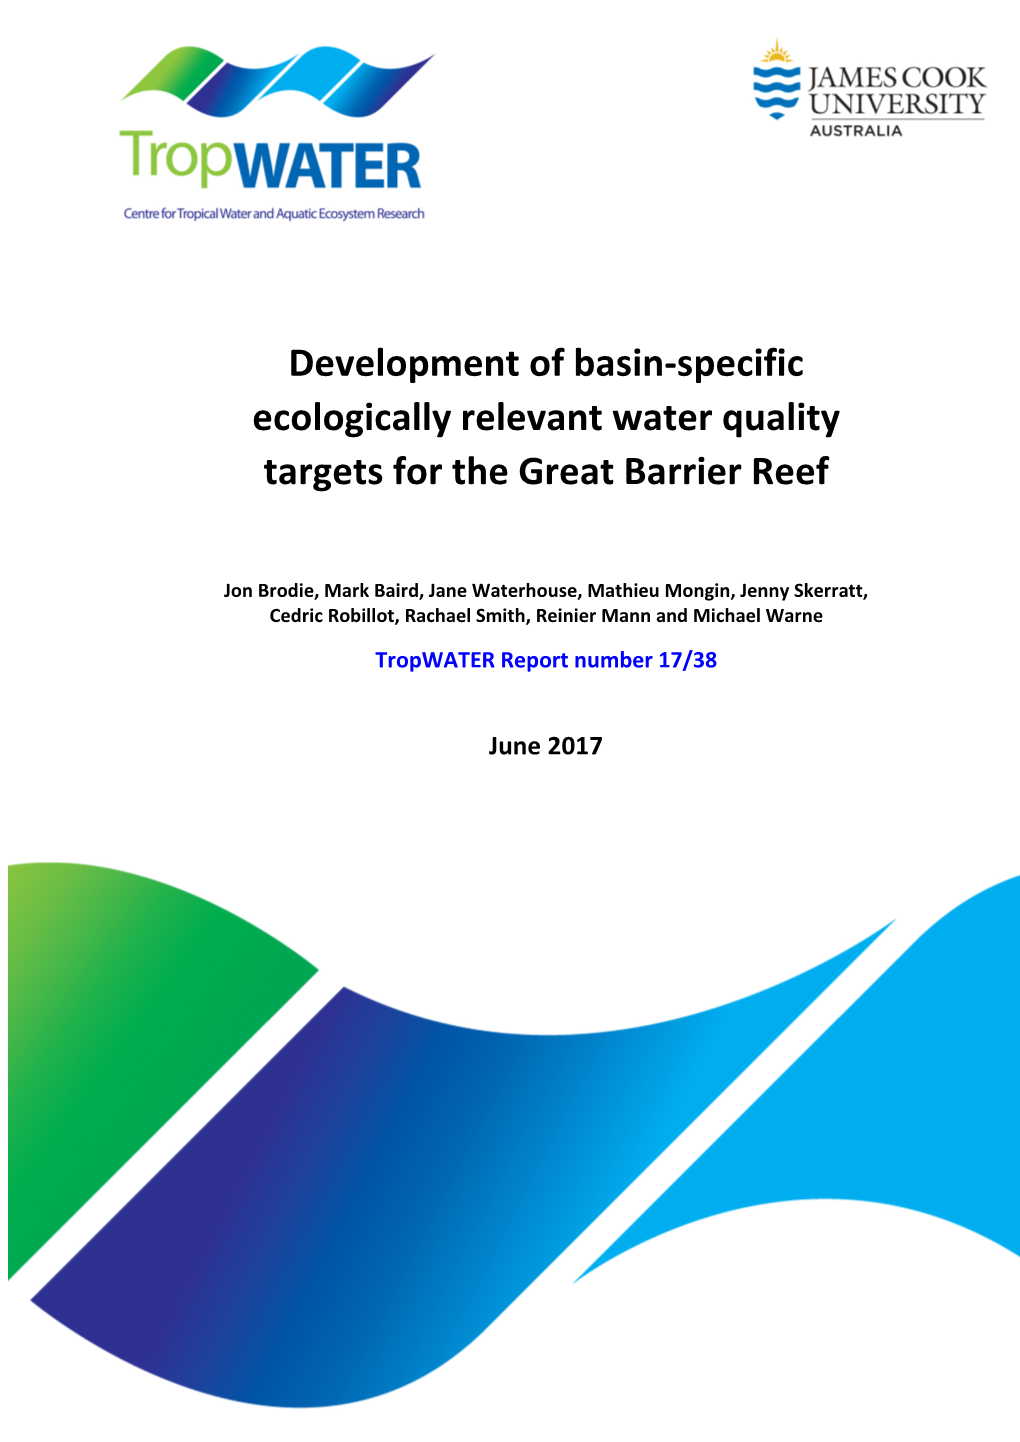 Basin-Specific Ecologically Relevant Water Quality Targets for the Great Barrier Reef